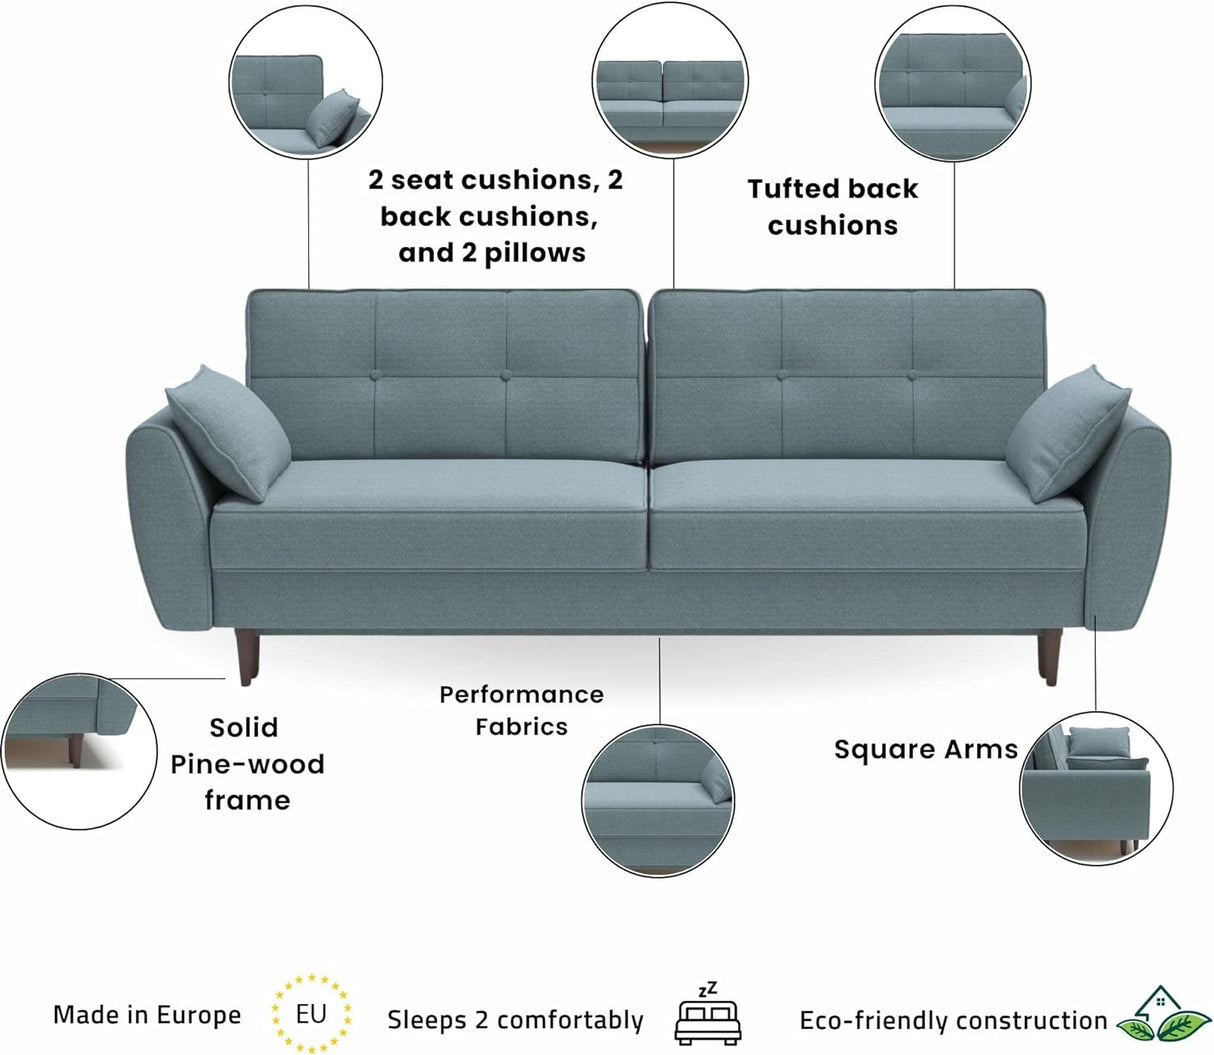 Modern Alisa Sleeper Sofa Bed - Storage Pull Out Couch, Revolution Performance Fabrics, Pine Wood, Birch Legs, Sleek Unique Arms, Made in Europe, Queen Size - Aquamarine